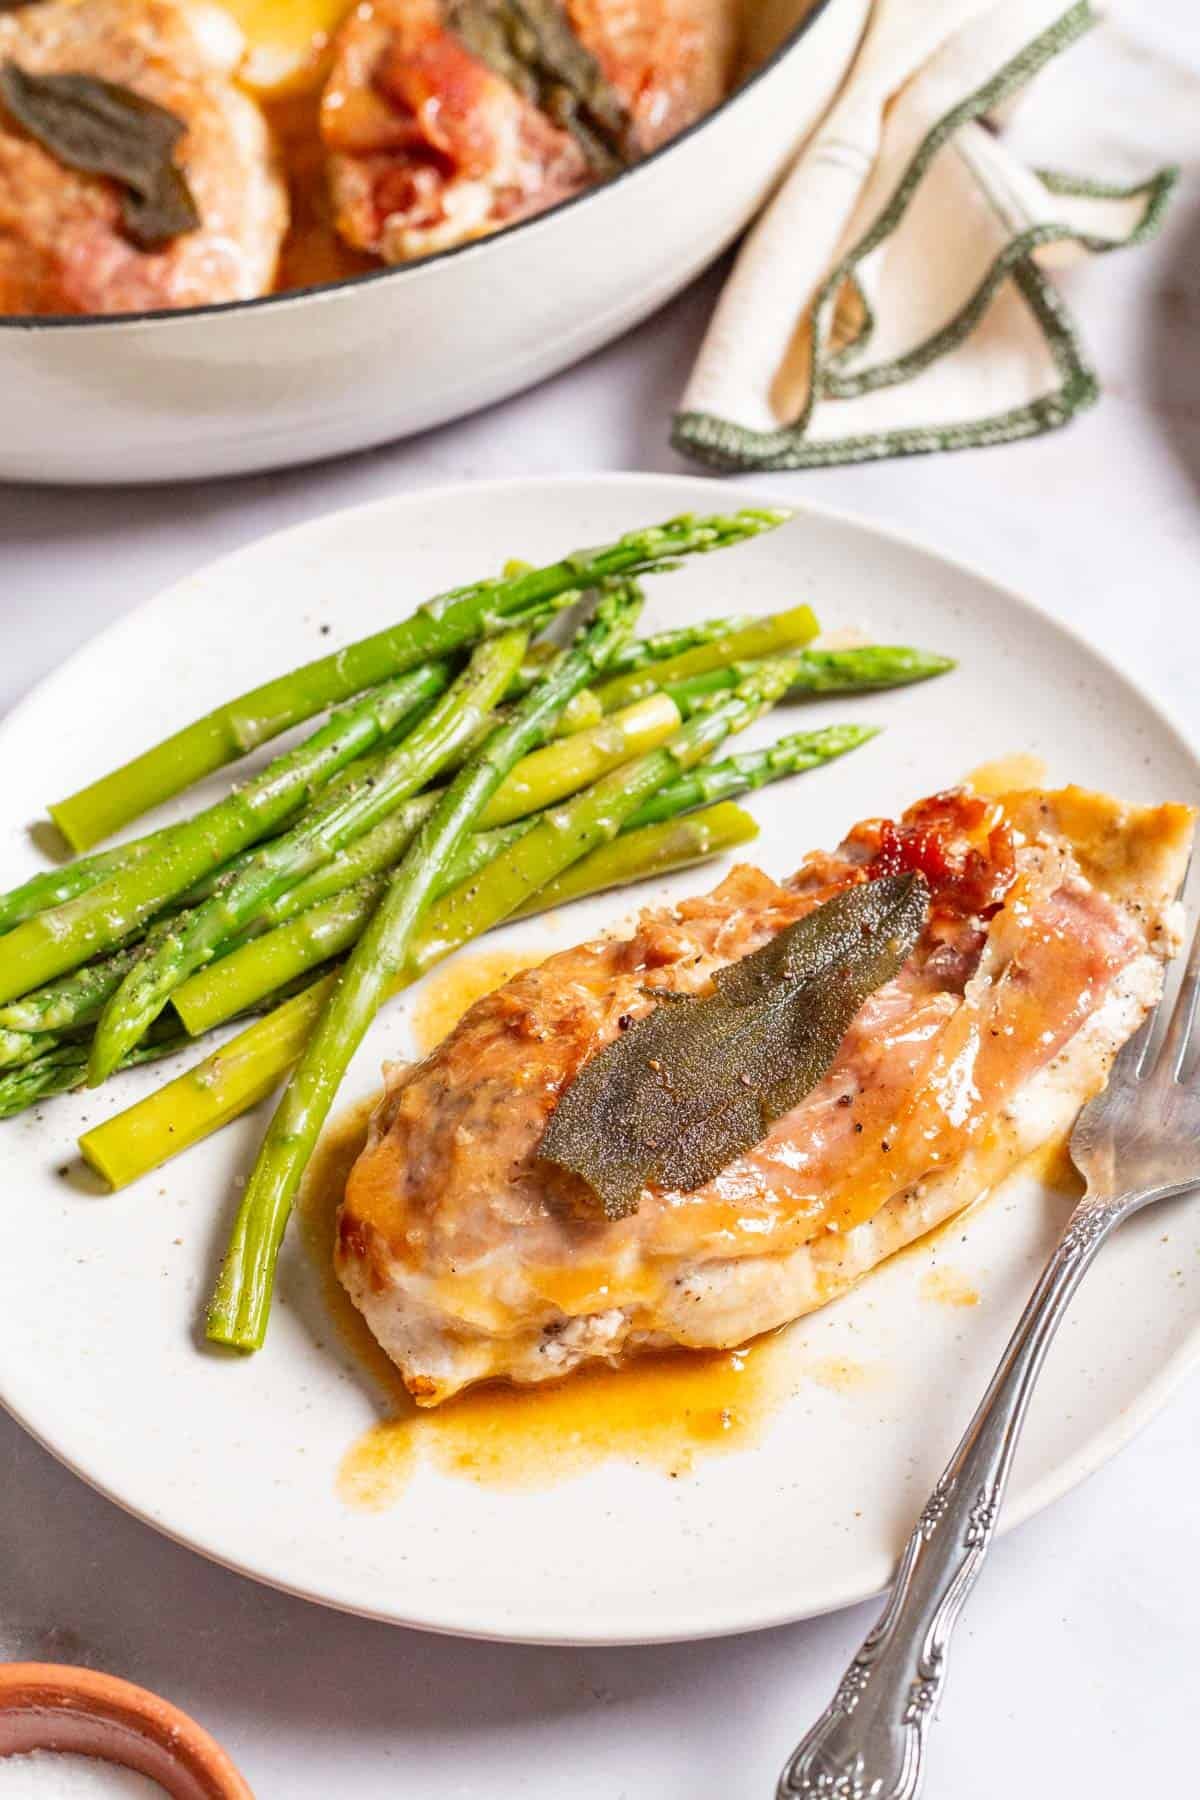 A close up of a serving of the chicken saltimbocca on a plate with a side of asparagus and a fork. Next to this is the rest of the chicken in a skillet and a kitchen towel.